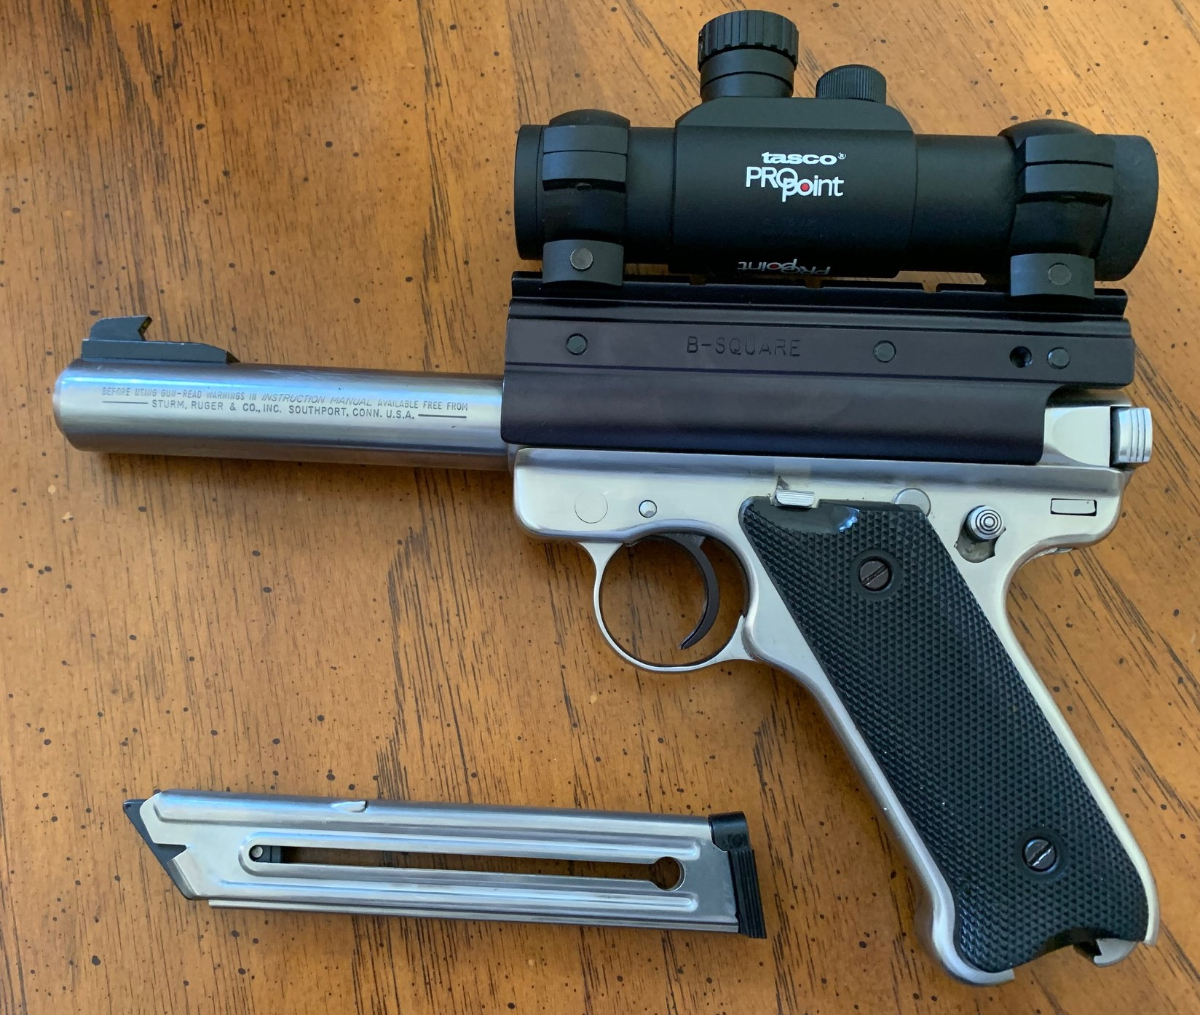 Ruger Mark Ii Stainless Steel W Tasco Accu Dot Red Dot Mounted On B Square Top Rail System